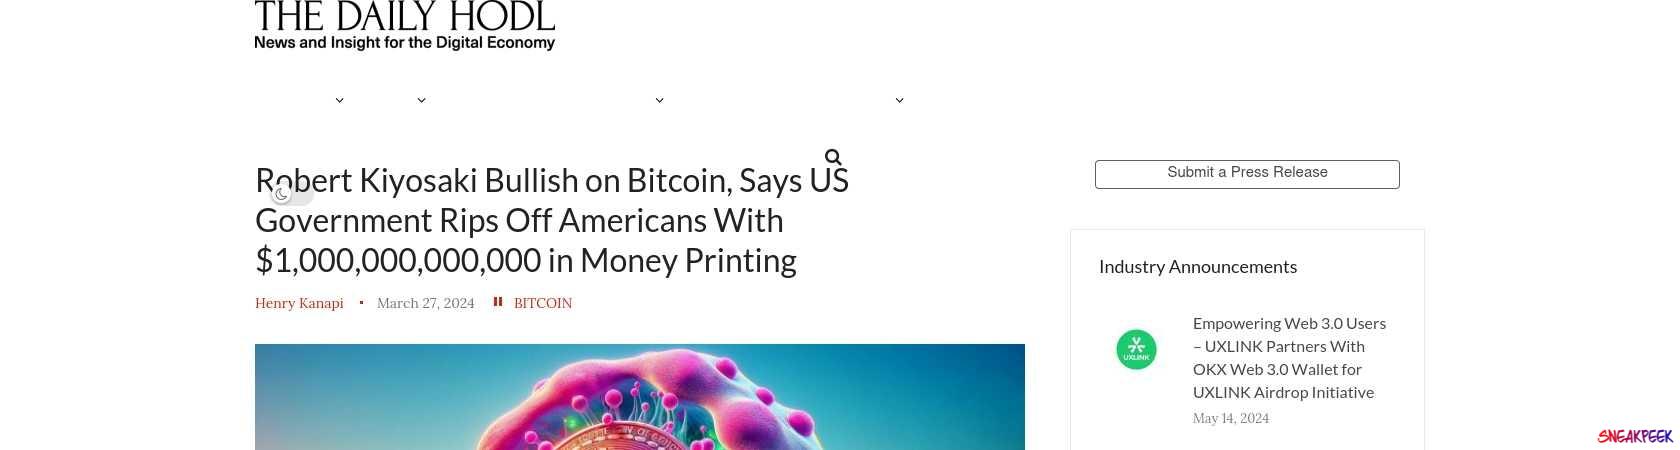 Read the full Article:  ⭲ Robert Kiyosaki Bullish on Bitcoin, Says US Government Rips Off Americans With $1,000,000,000,000 in Money Printing